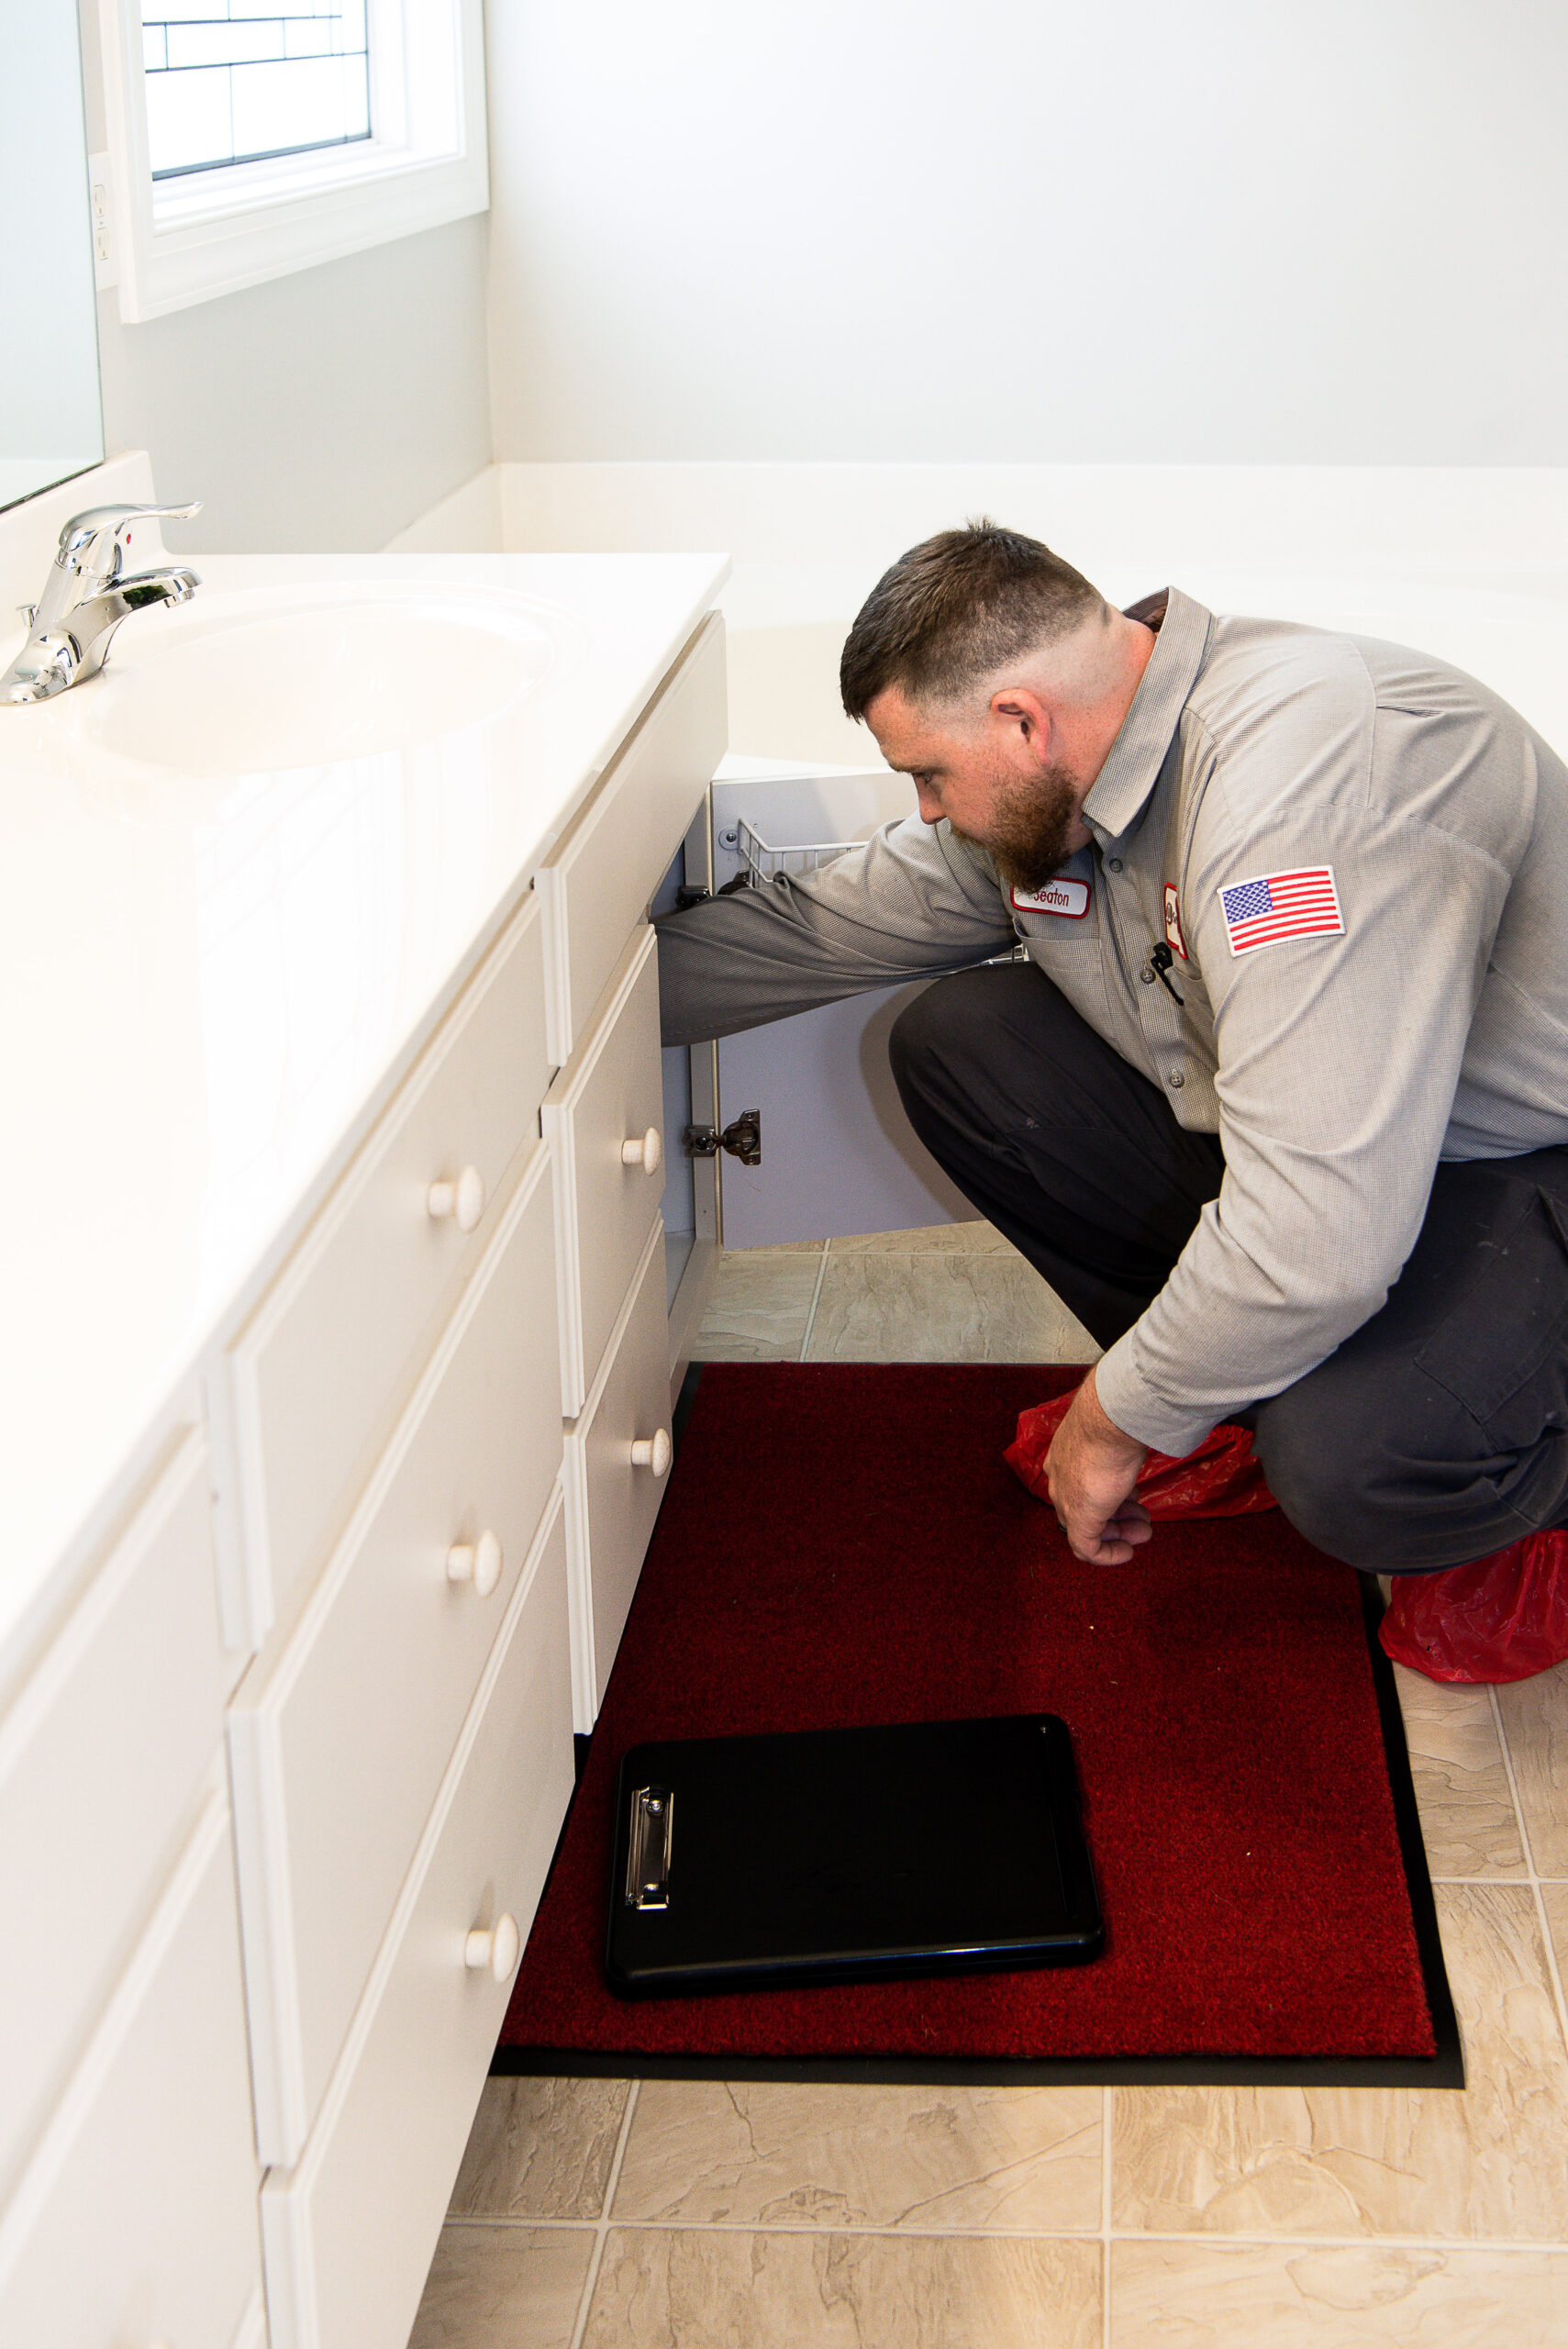 JD Service Now plumber inspects the drain underneath a bathroom sink in a house